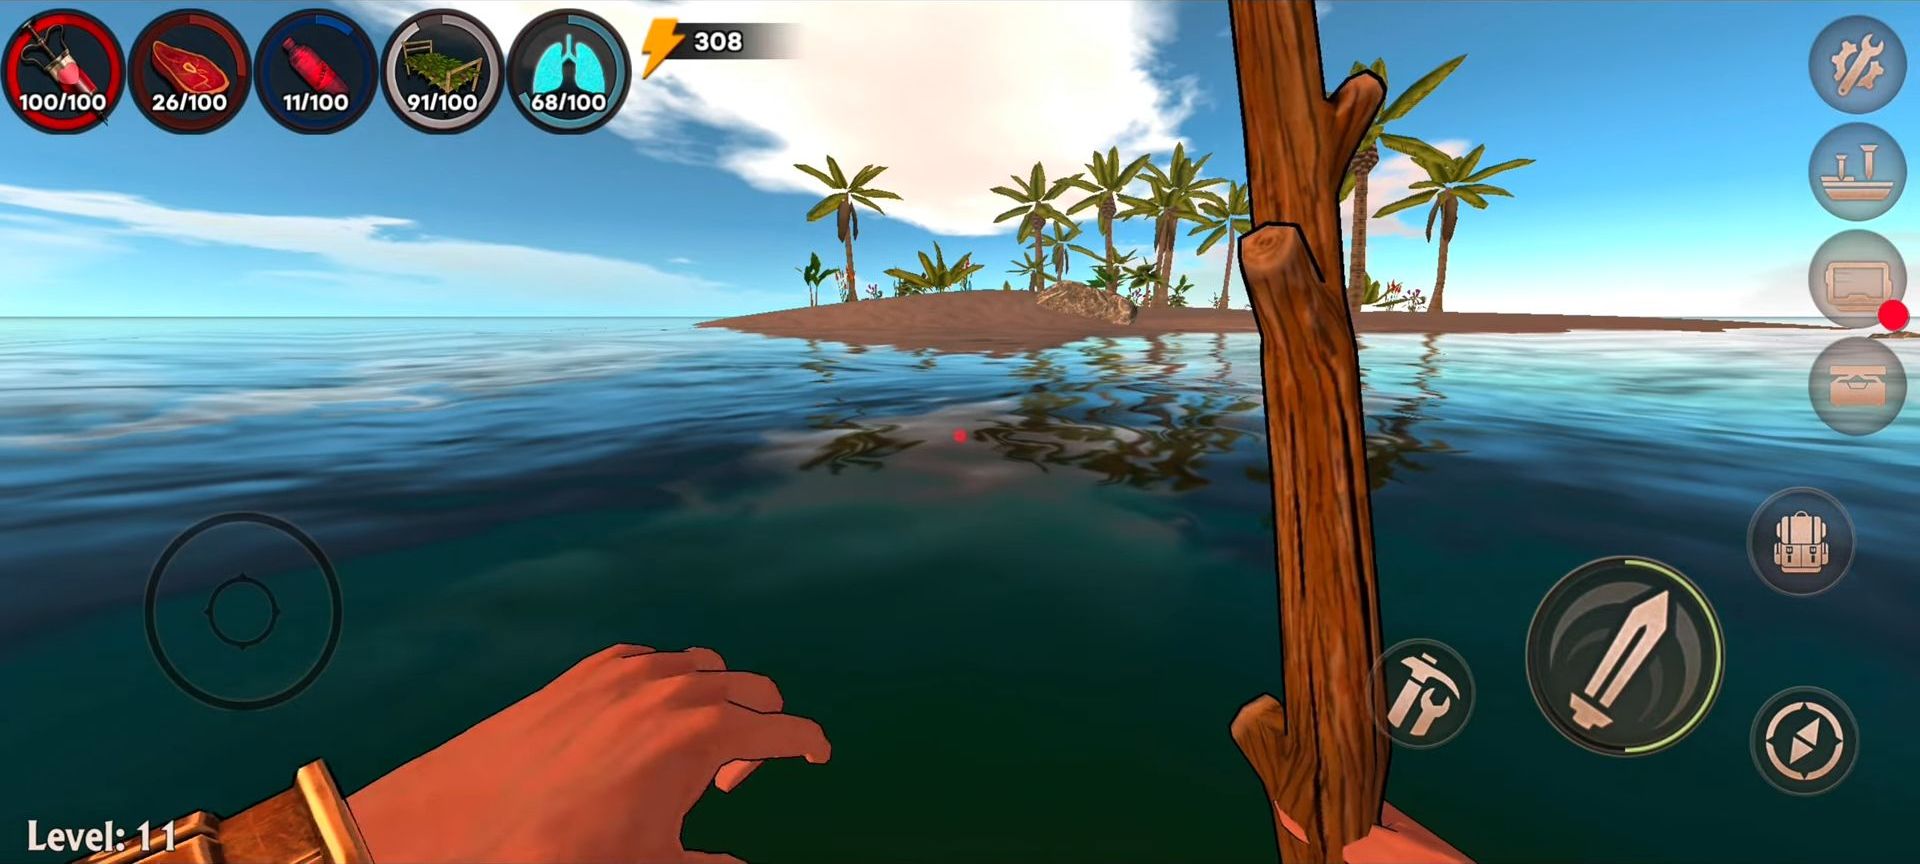 Gameplay of the Last Maverick: Raft Games Pro for Android phone or tablet.